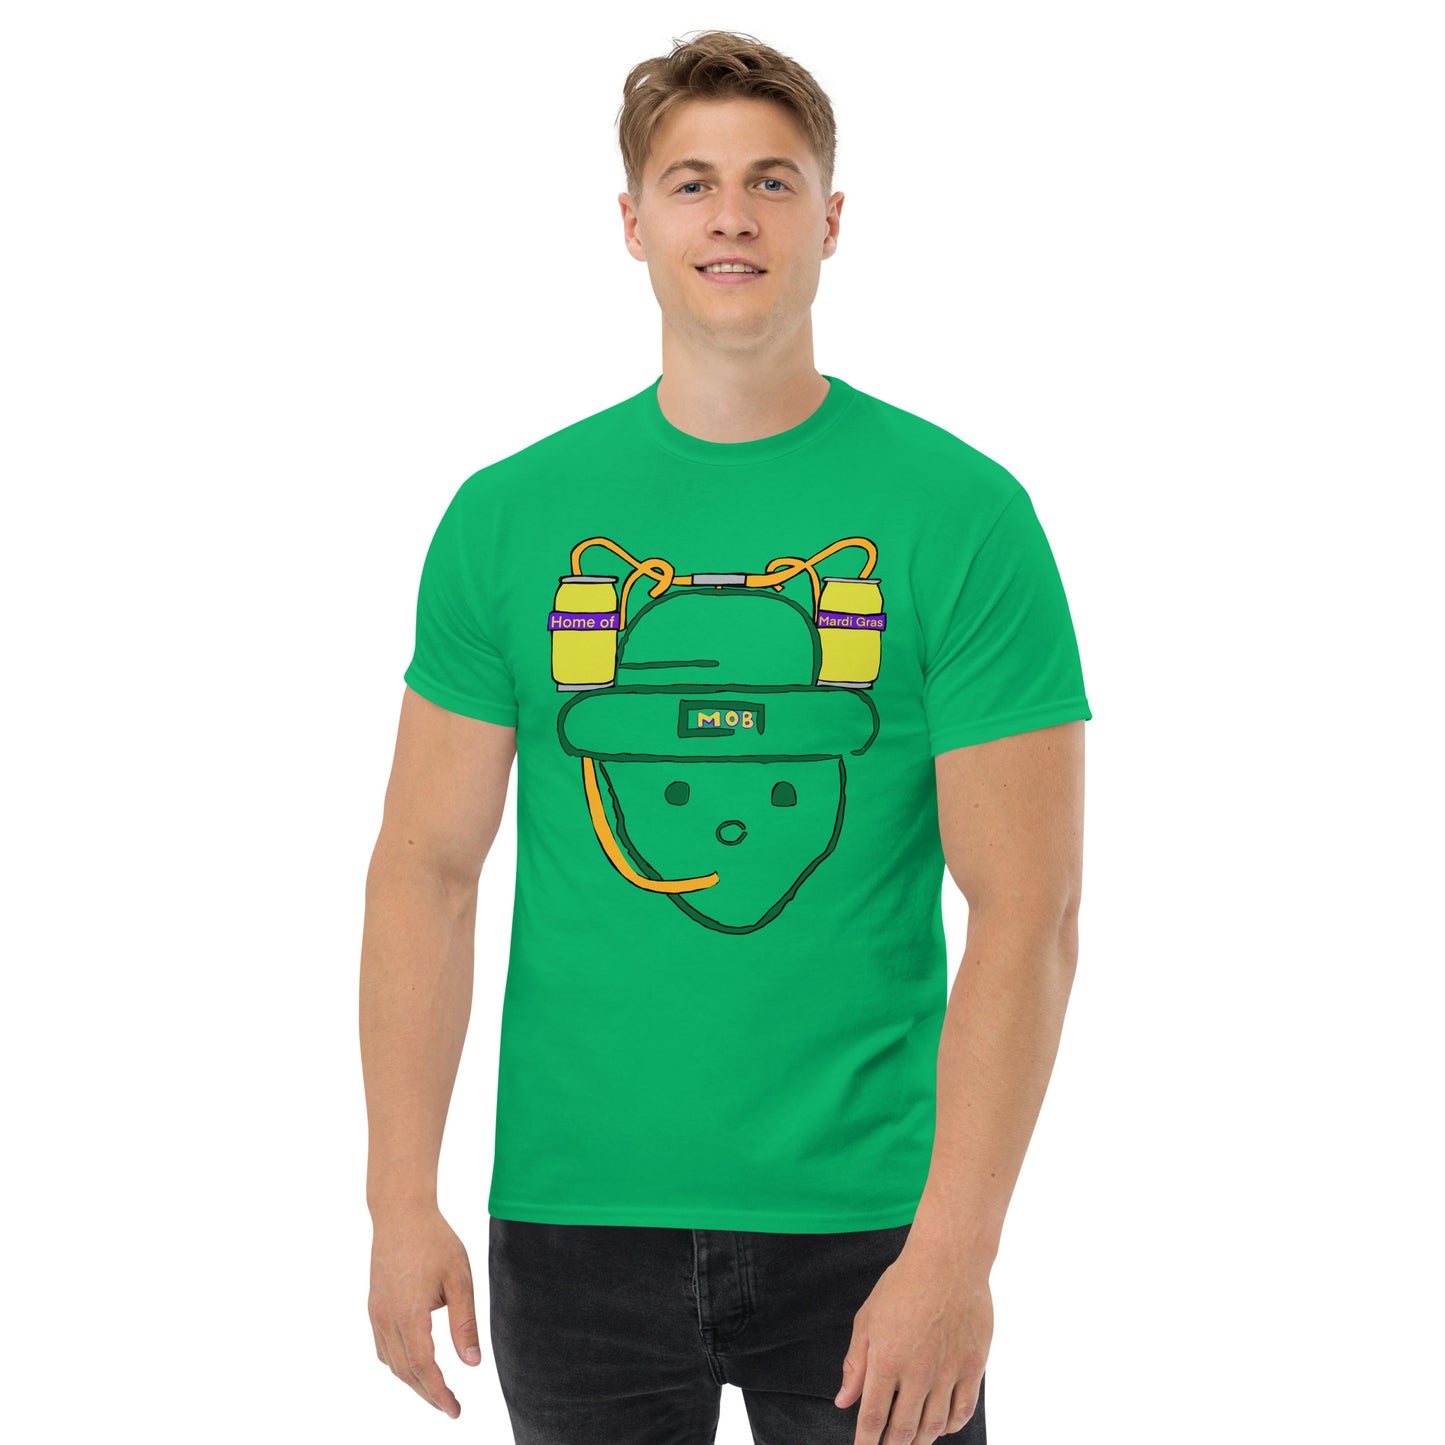 The Mobile Leprchan tee